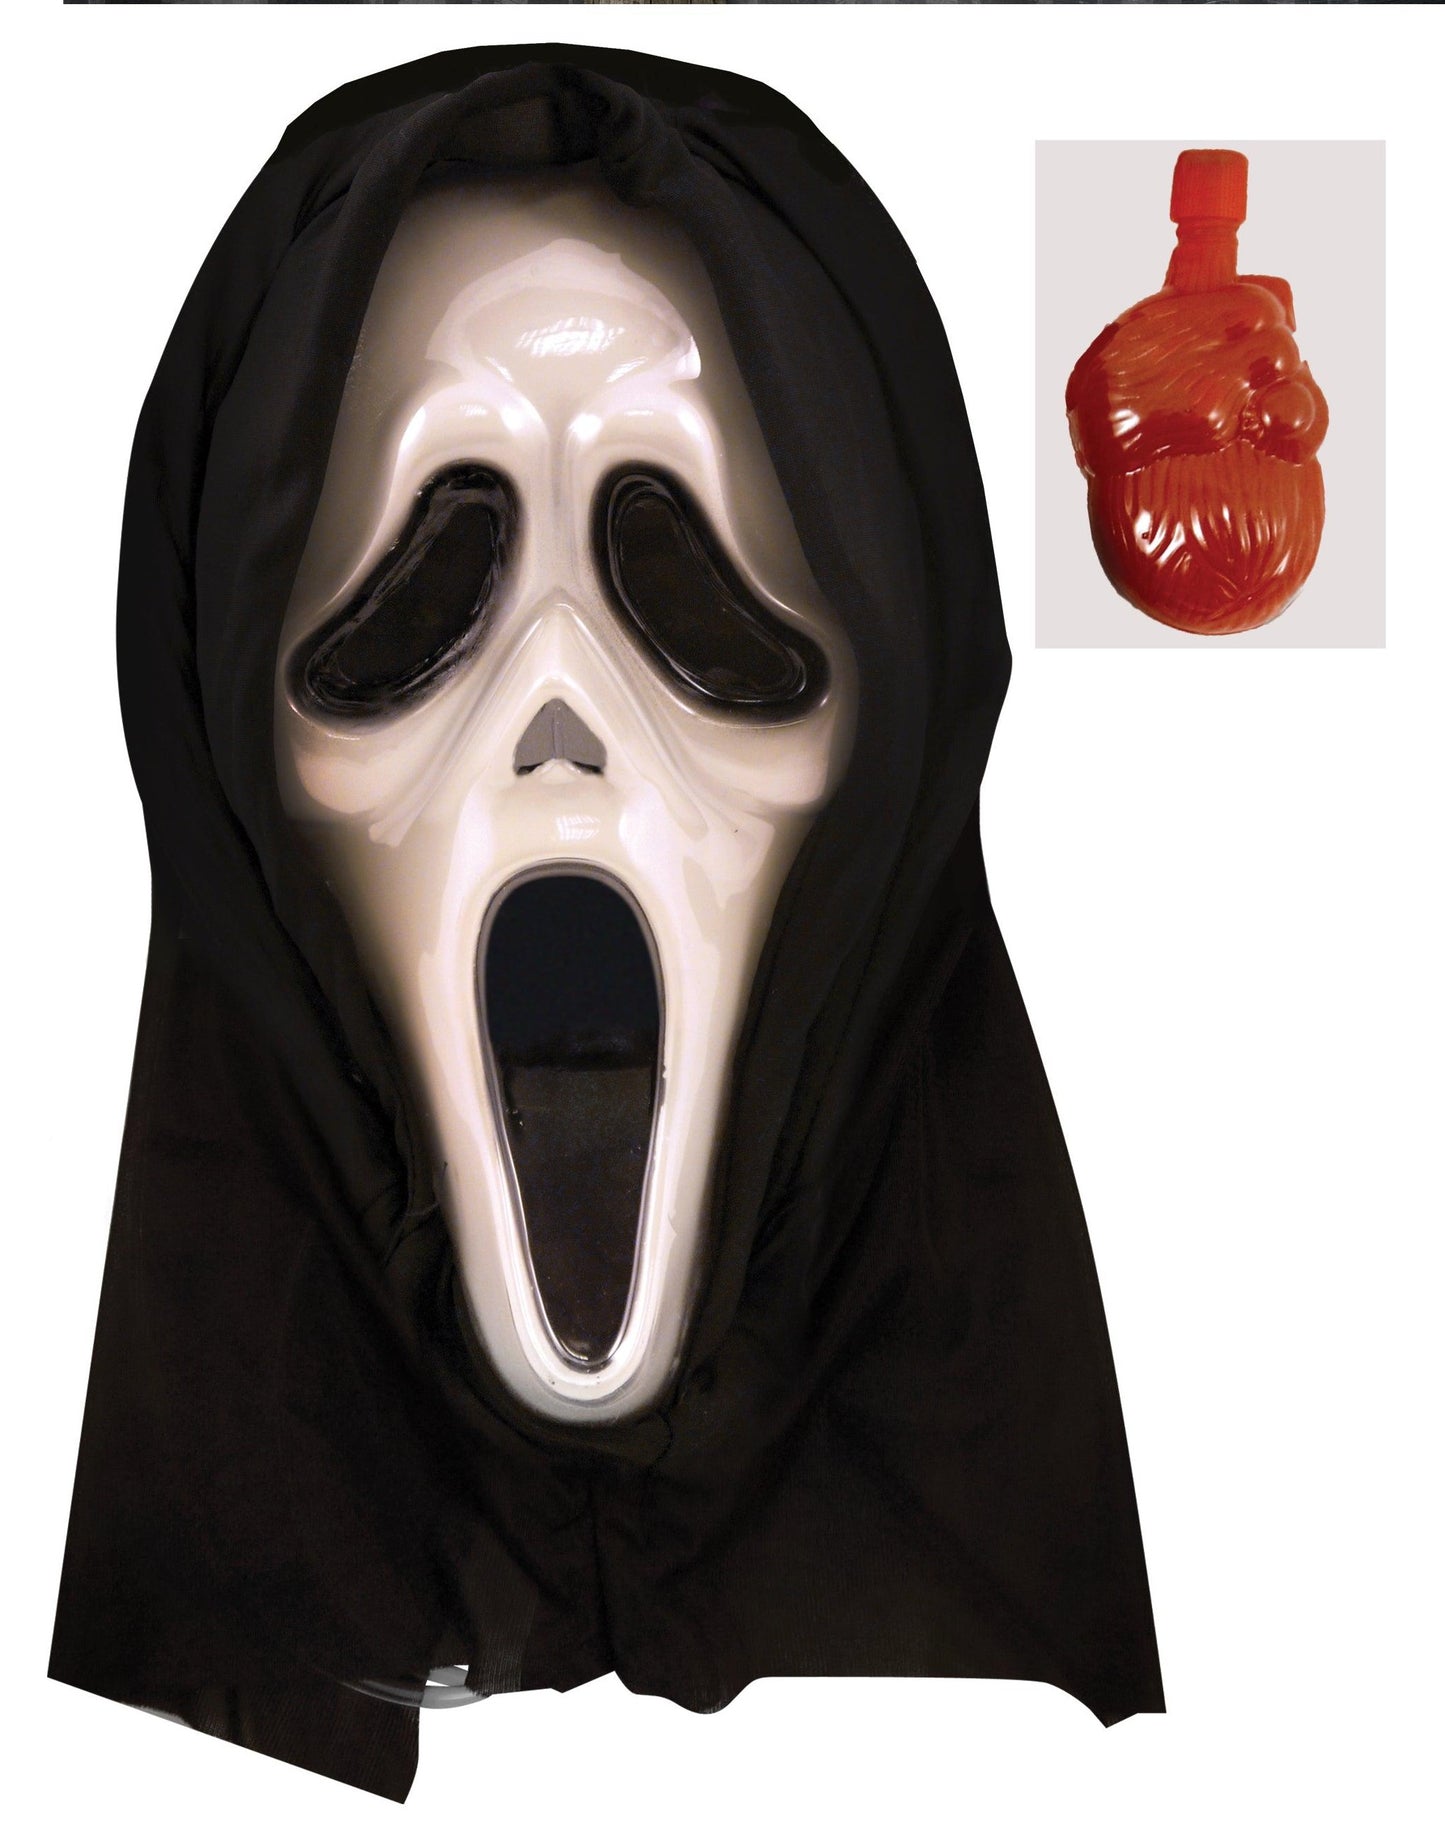 Labreeze Gruesome Bleeding Scream Mask - Halloween Horror Accessory with Oozing Blood Effect